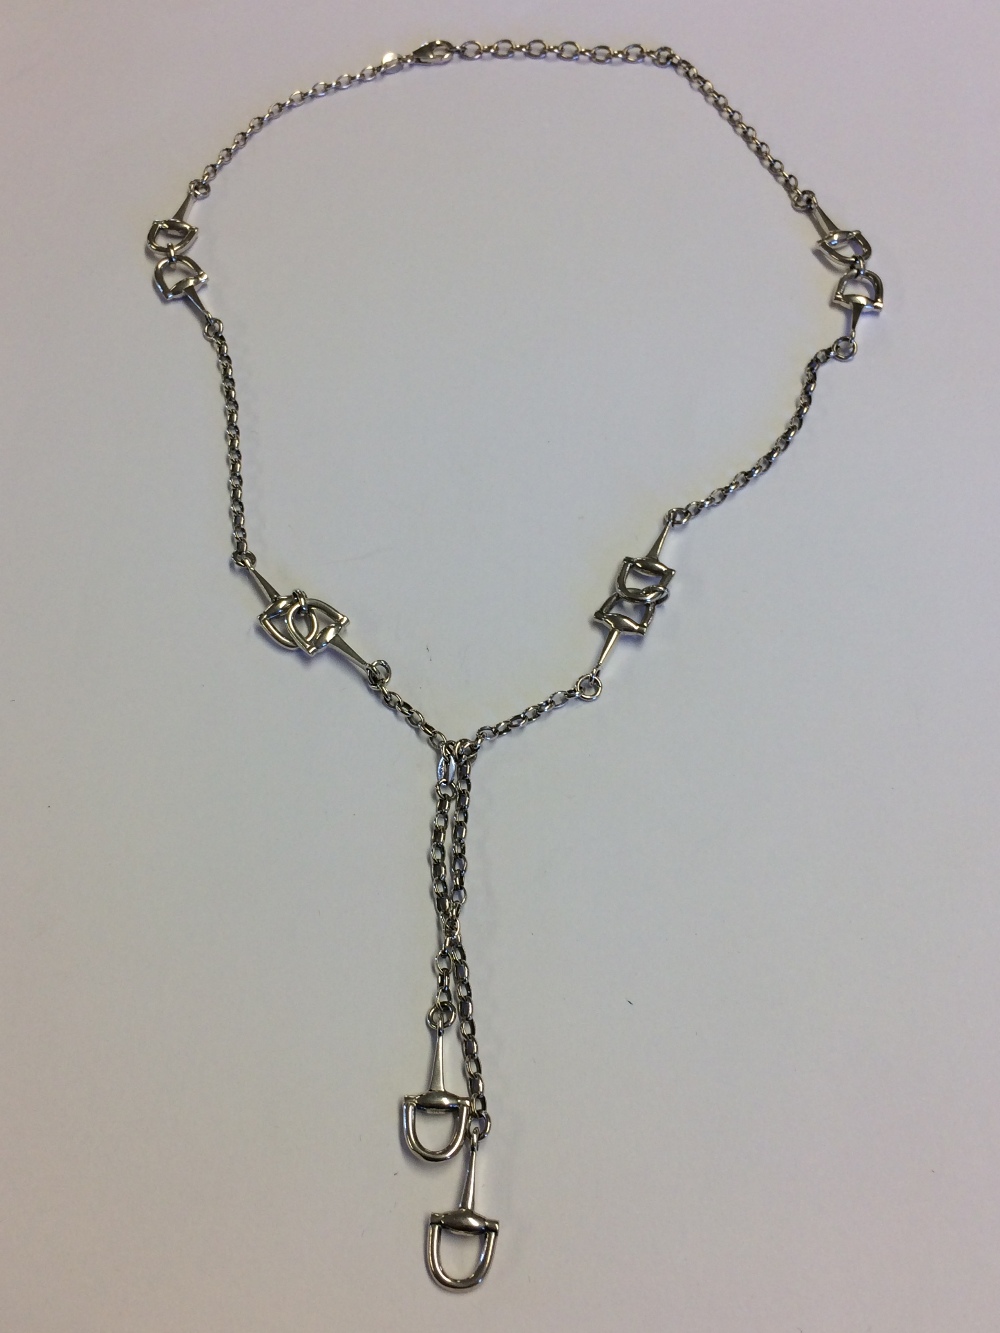 Silver chain link Albert with stirrup spacers